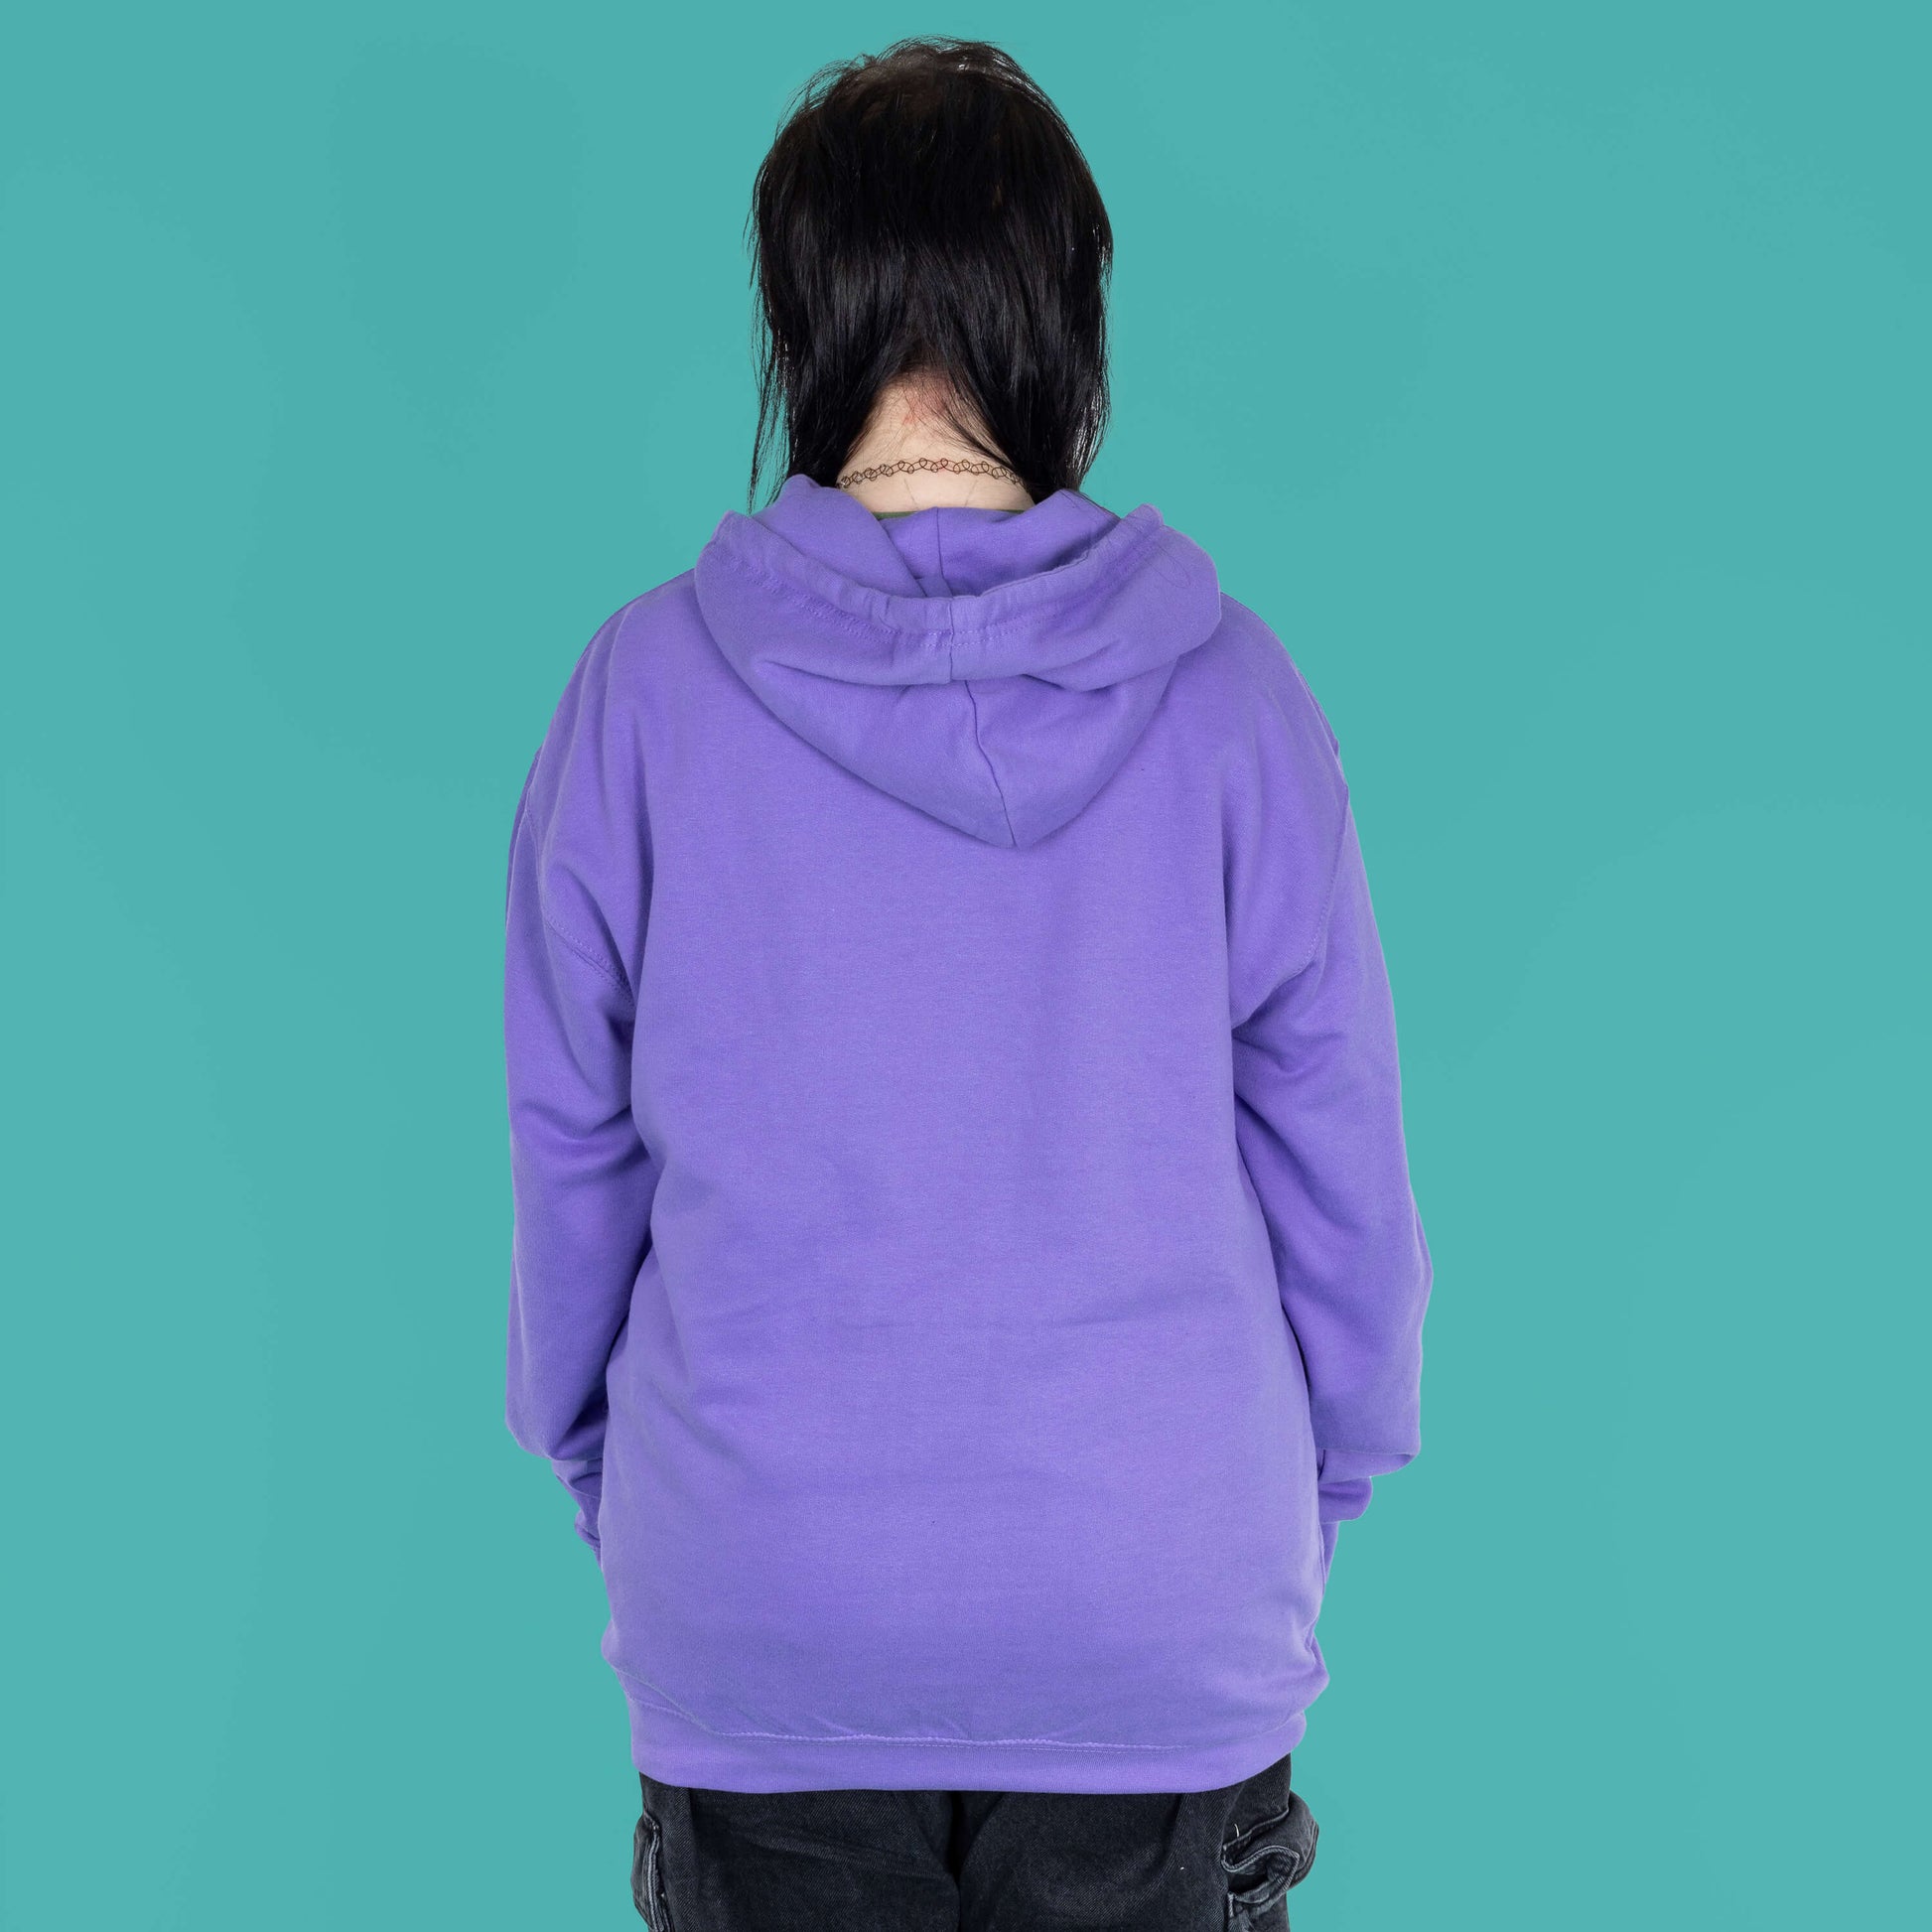 The Dopamine Seeker Hoodie in digital lavender being modelled by Faeryn who has a green and black mullet, they have styled the cosy hoodie with wide leg charcoal jeans. They are facing away from camera to show the plain pastel purple back. The hoodie design has 'dopamine seeker' written in the middle in rainbow bubble font and black sparkle outlines. The hoodie has purple drawstrings and a large centre pocket. Design is raising awareness for ADHD and neurodivergence.